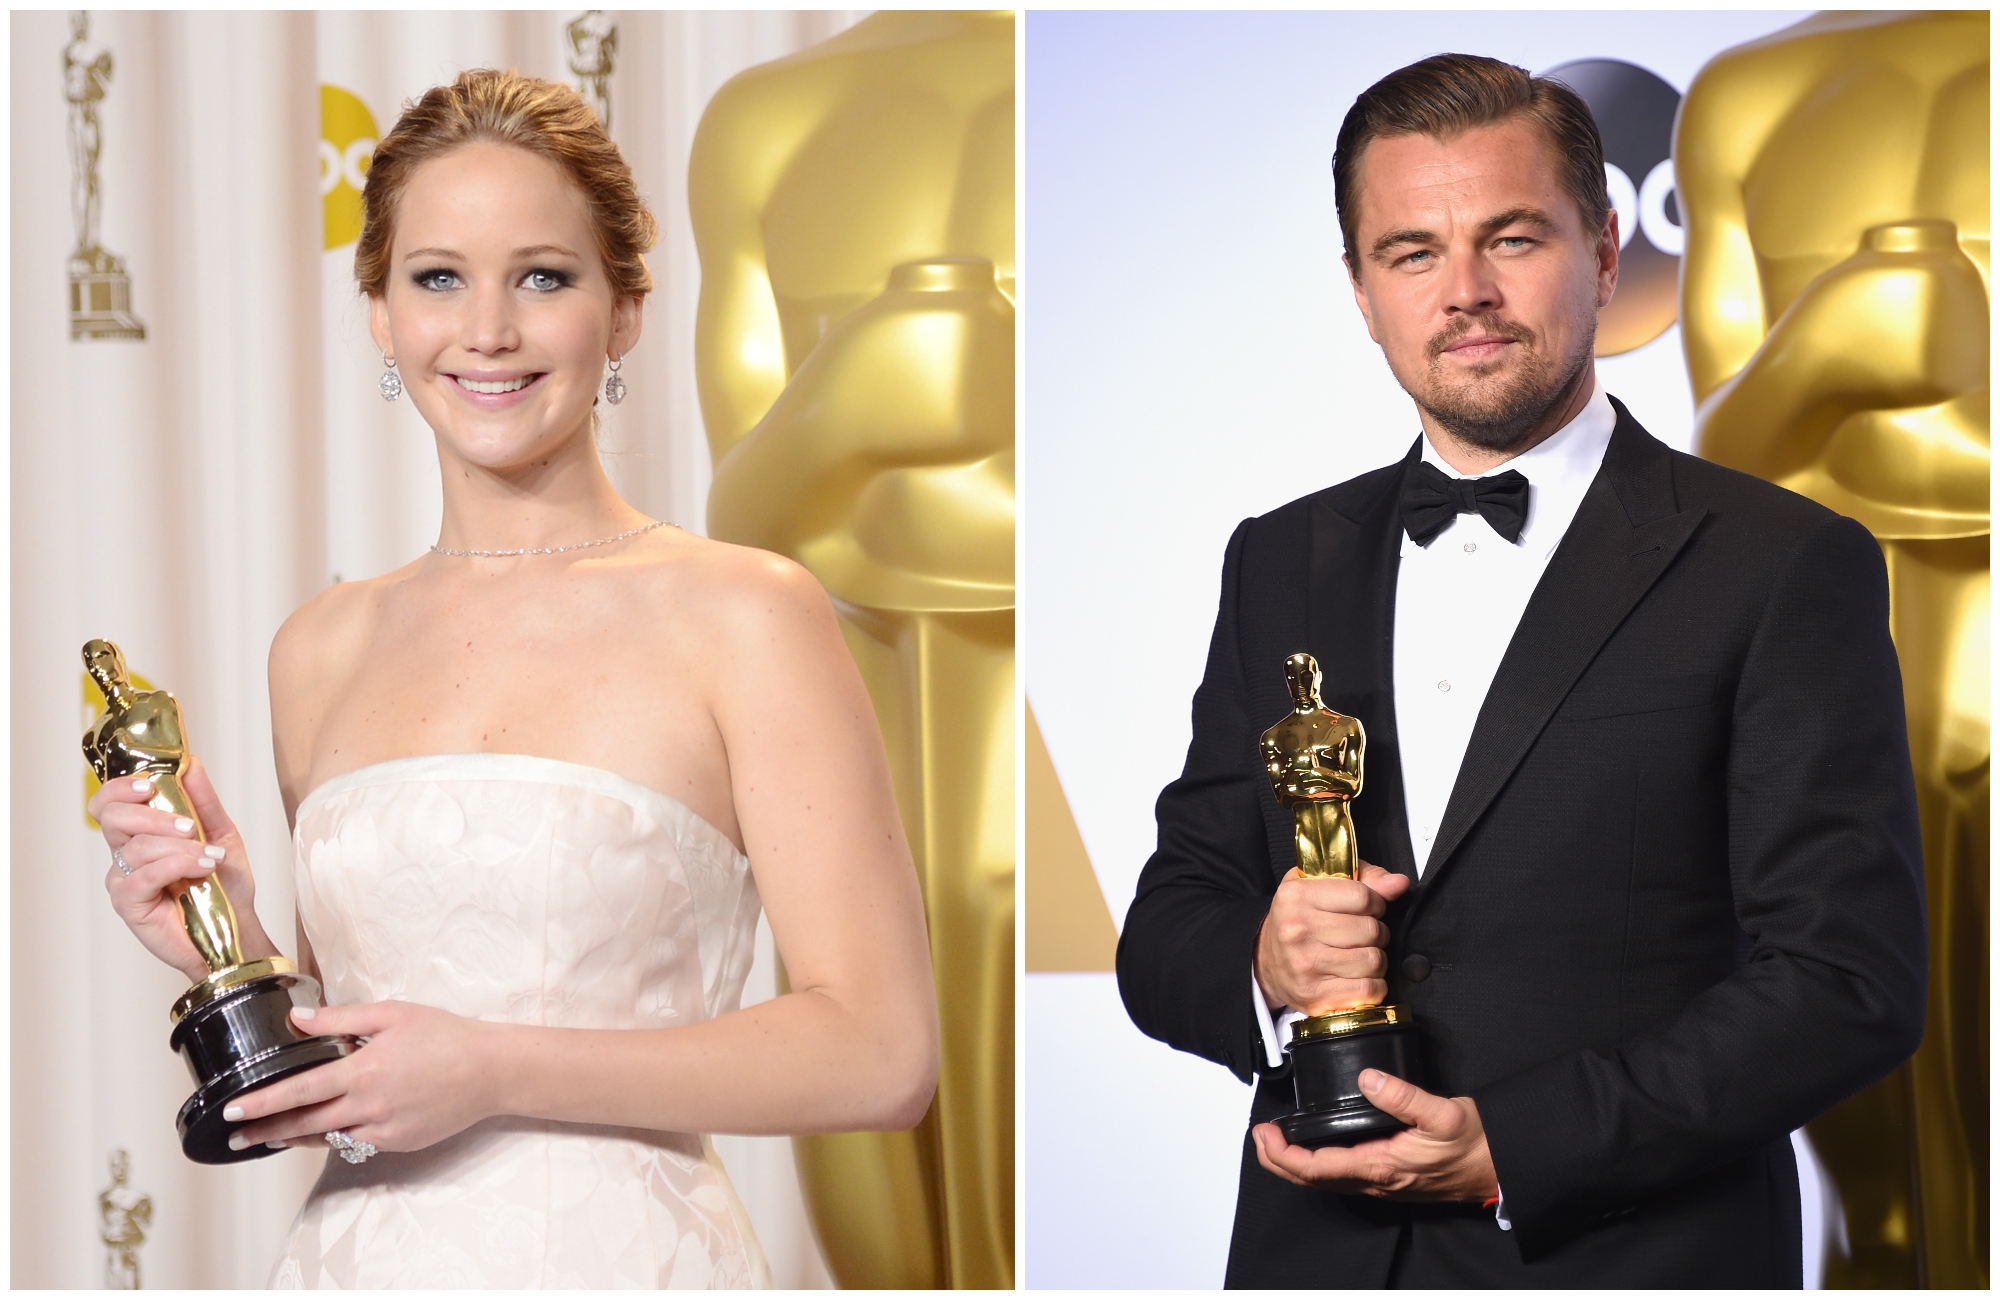 List of awards and nominations received by Jennifer Lawrence